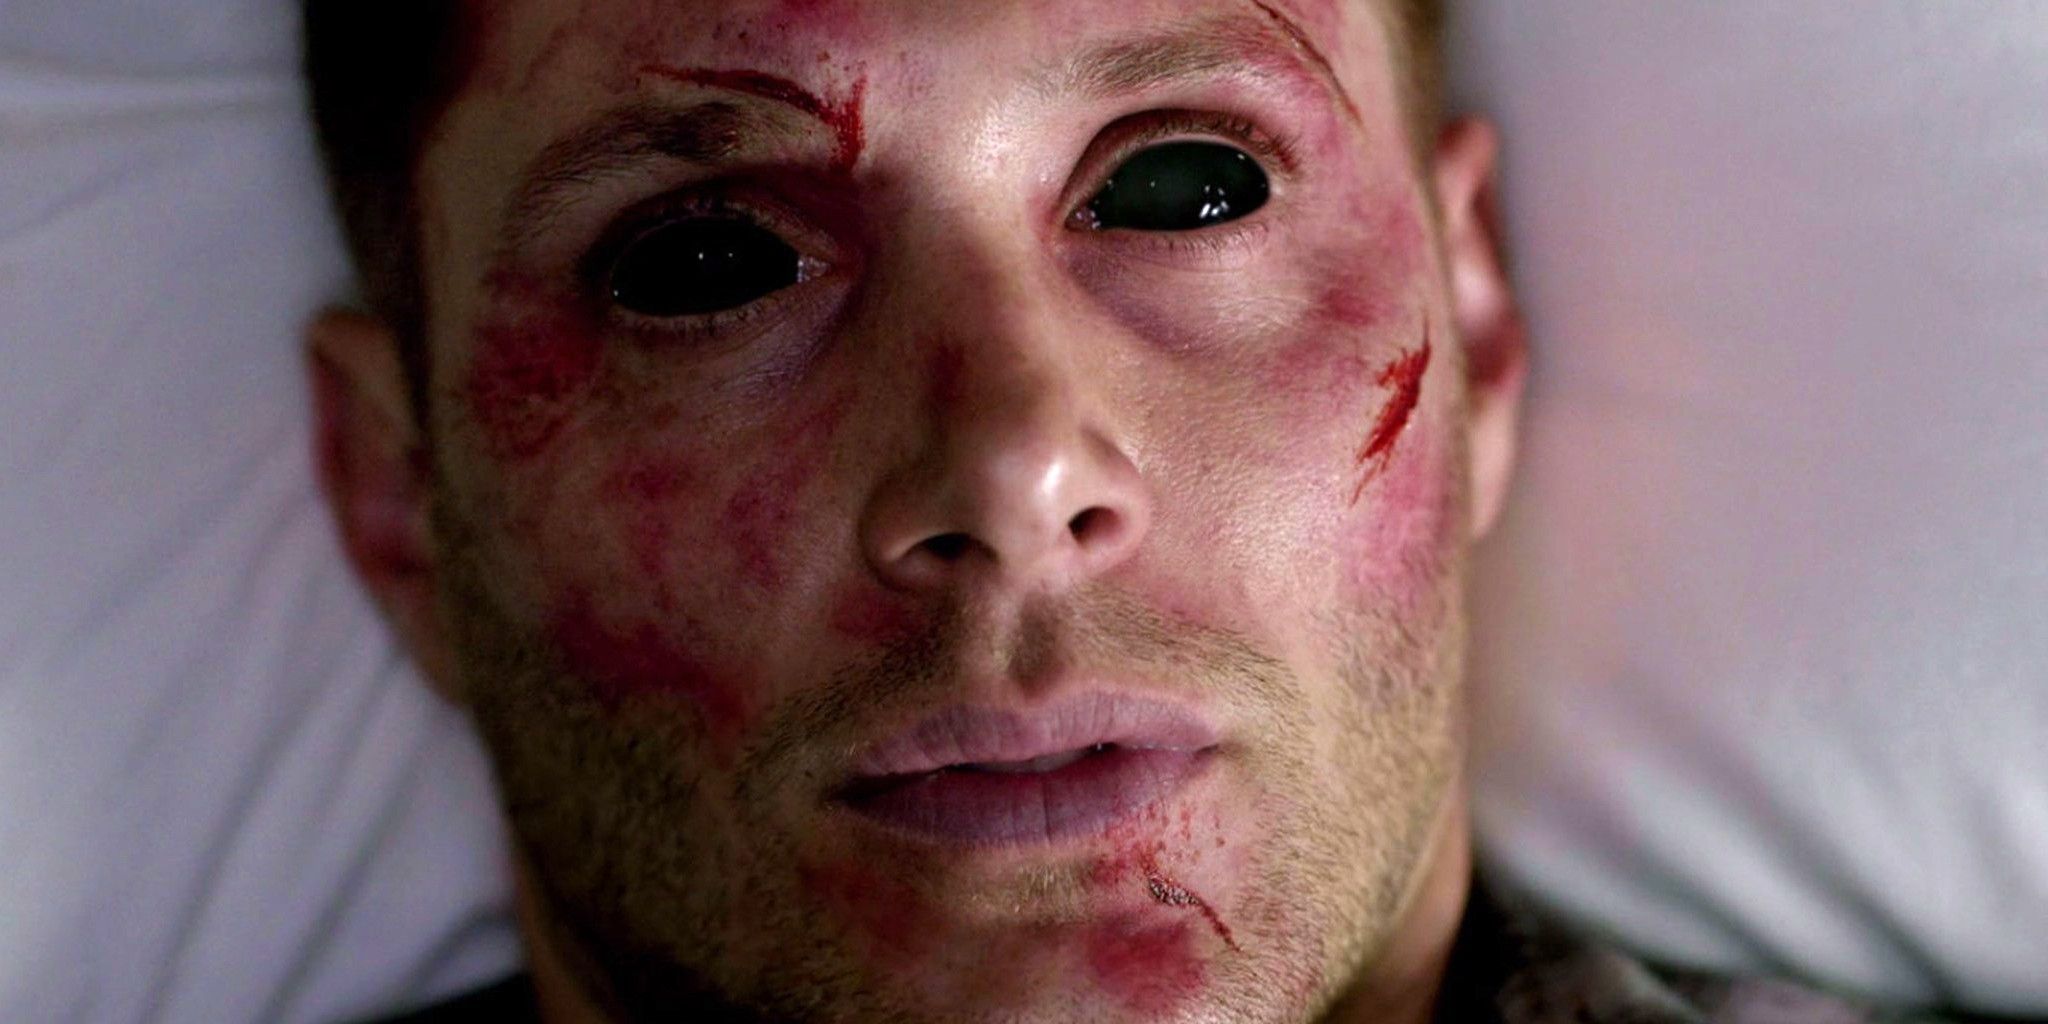 Supernatural - Dean wakes up as a demon after being killed by Metatron